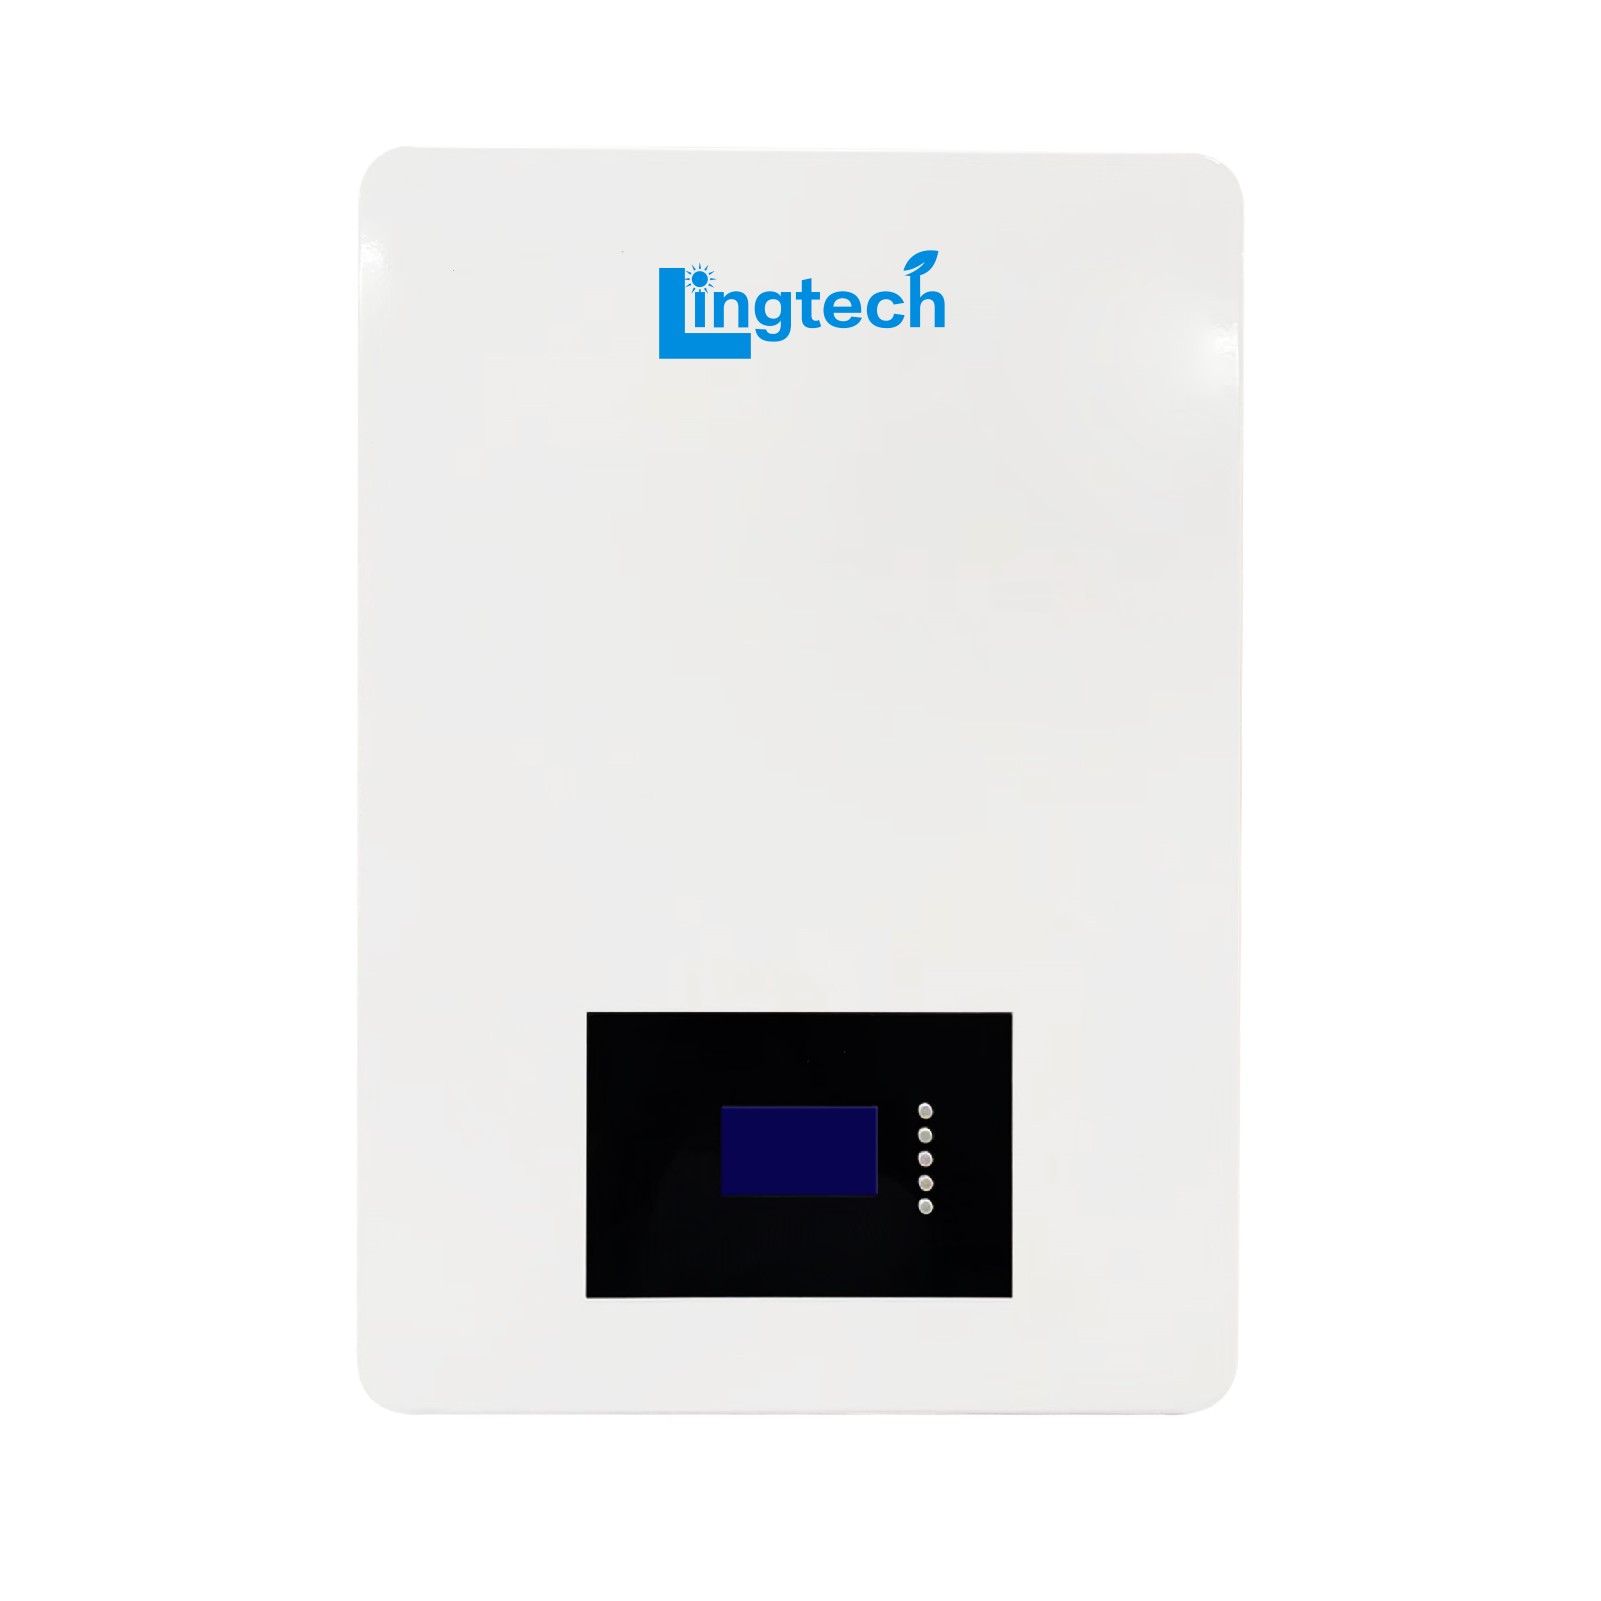 Lingtech 5kwh residential wall mounted battery